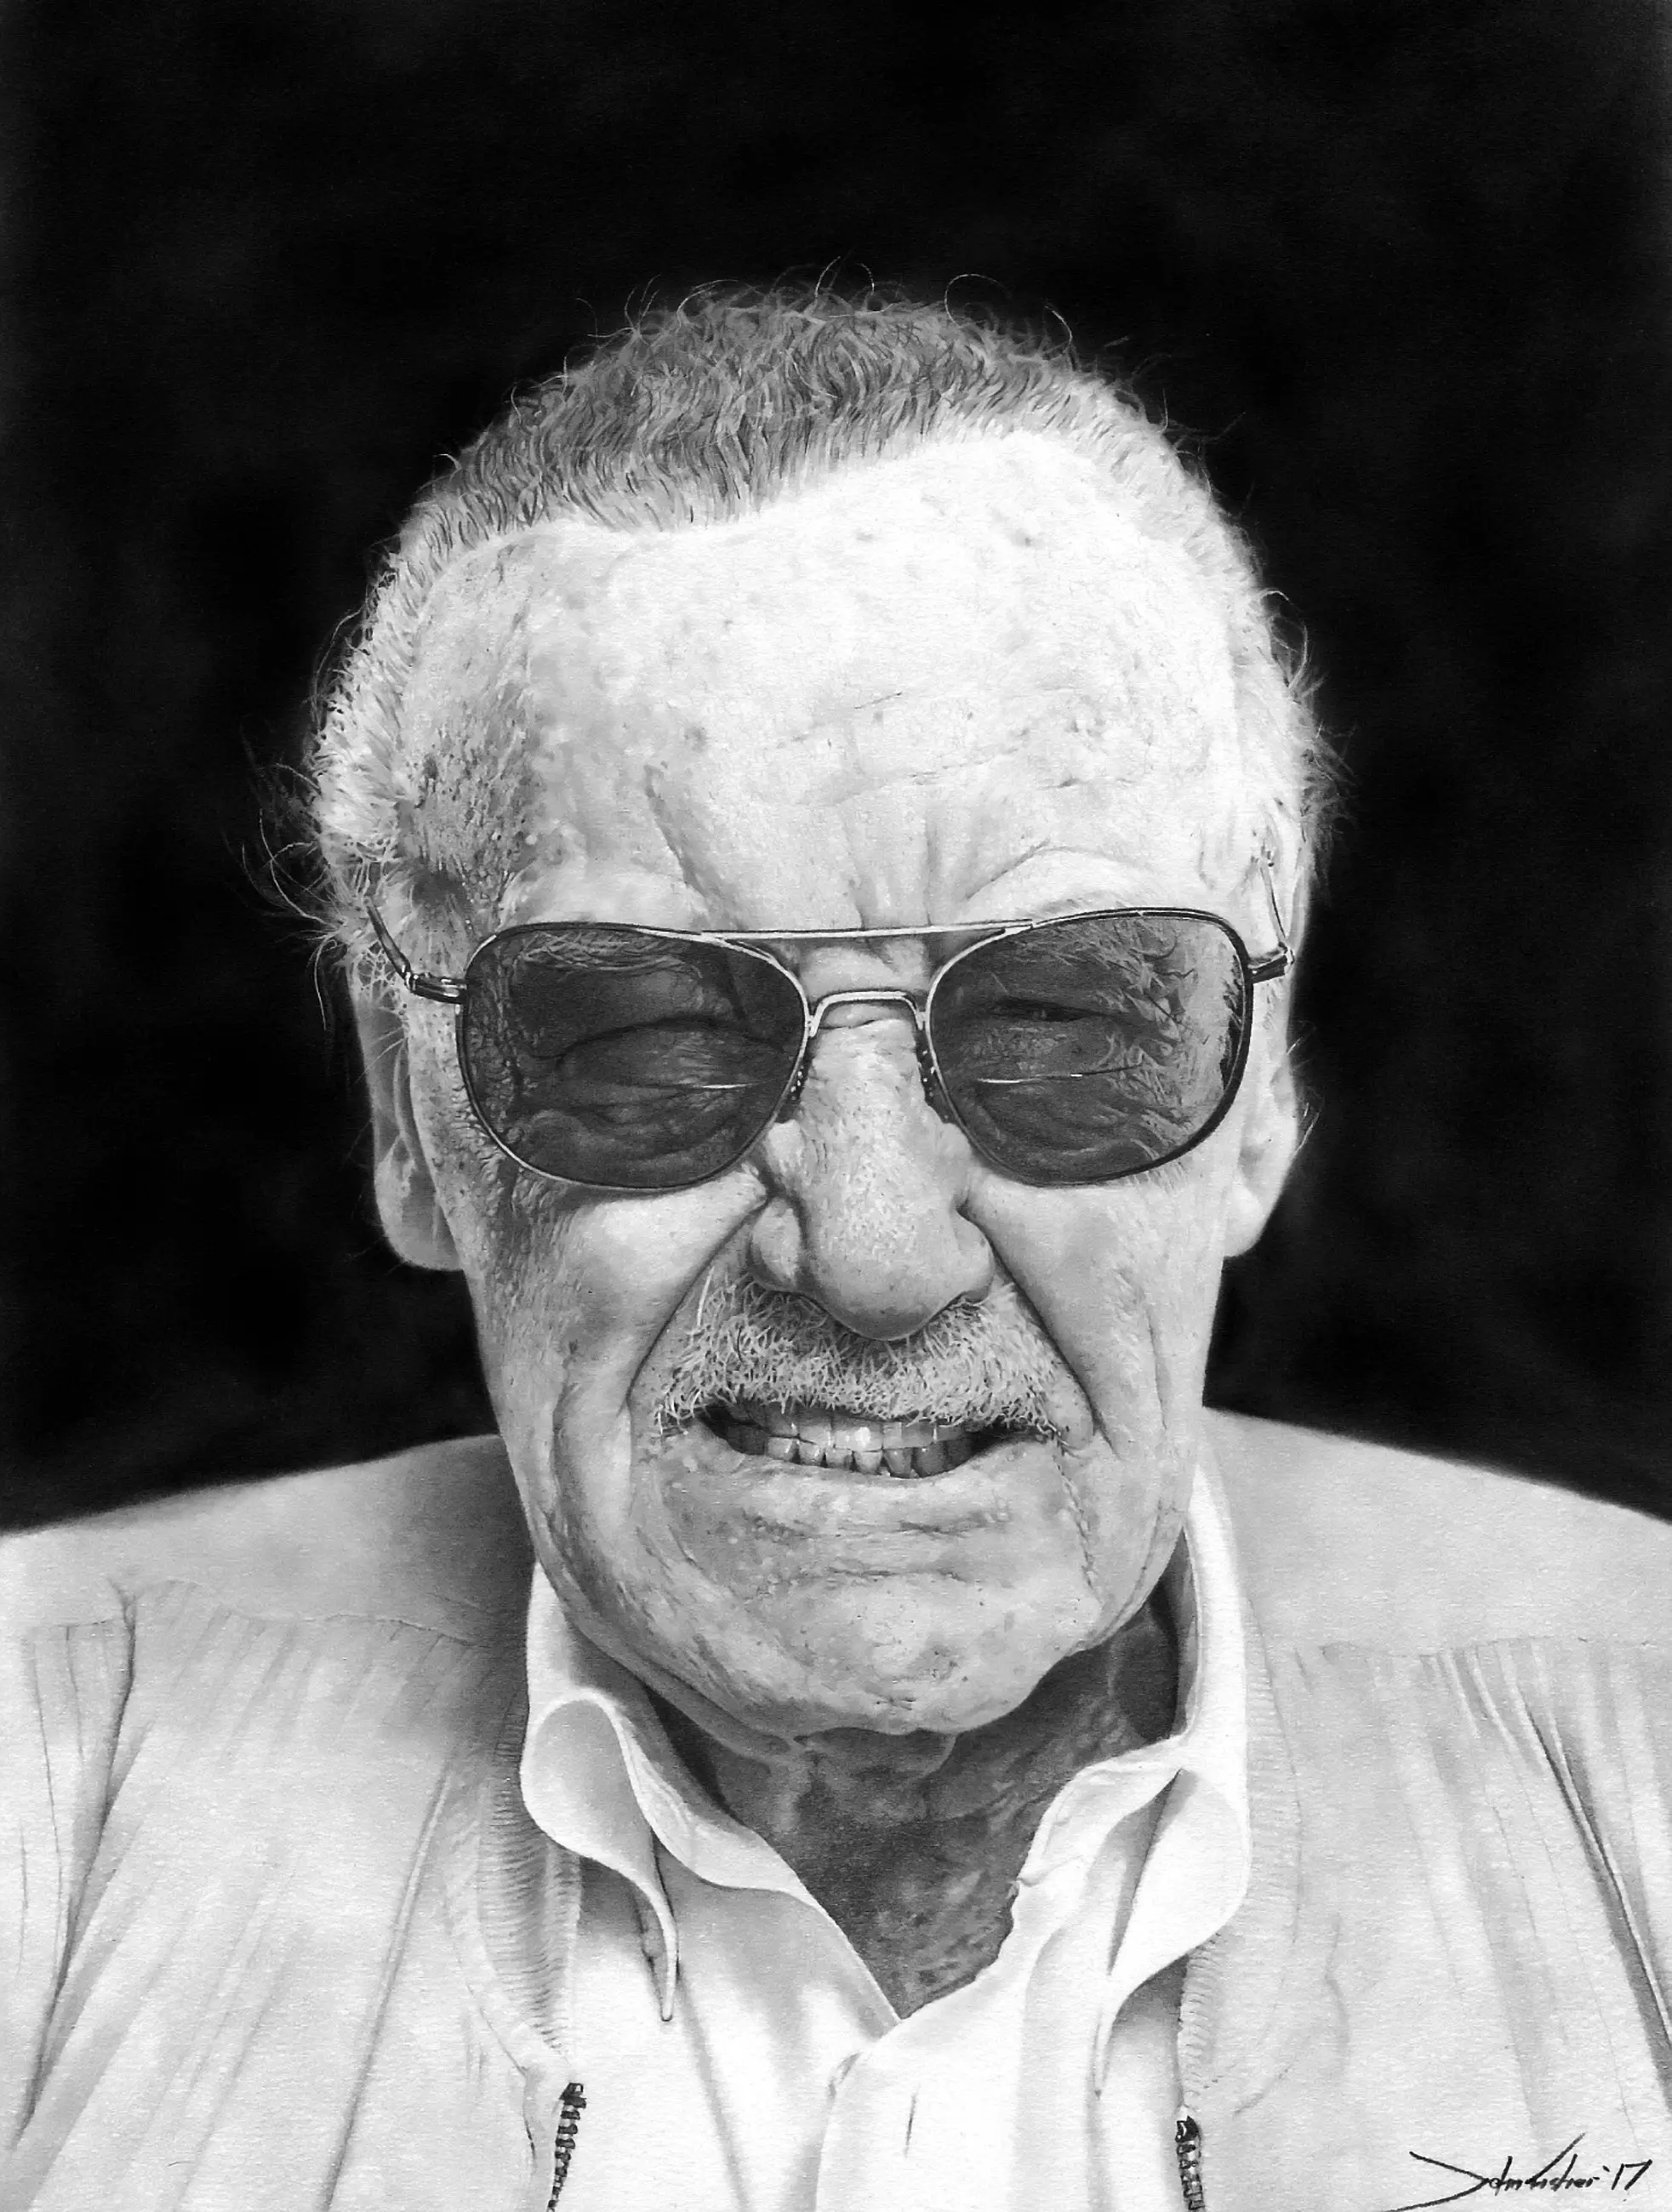 John draws celebrities as well as pets and people - here's Marvel legend Stan Lee.